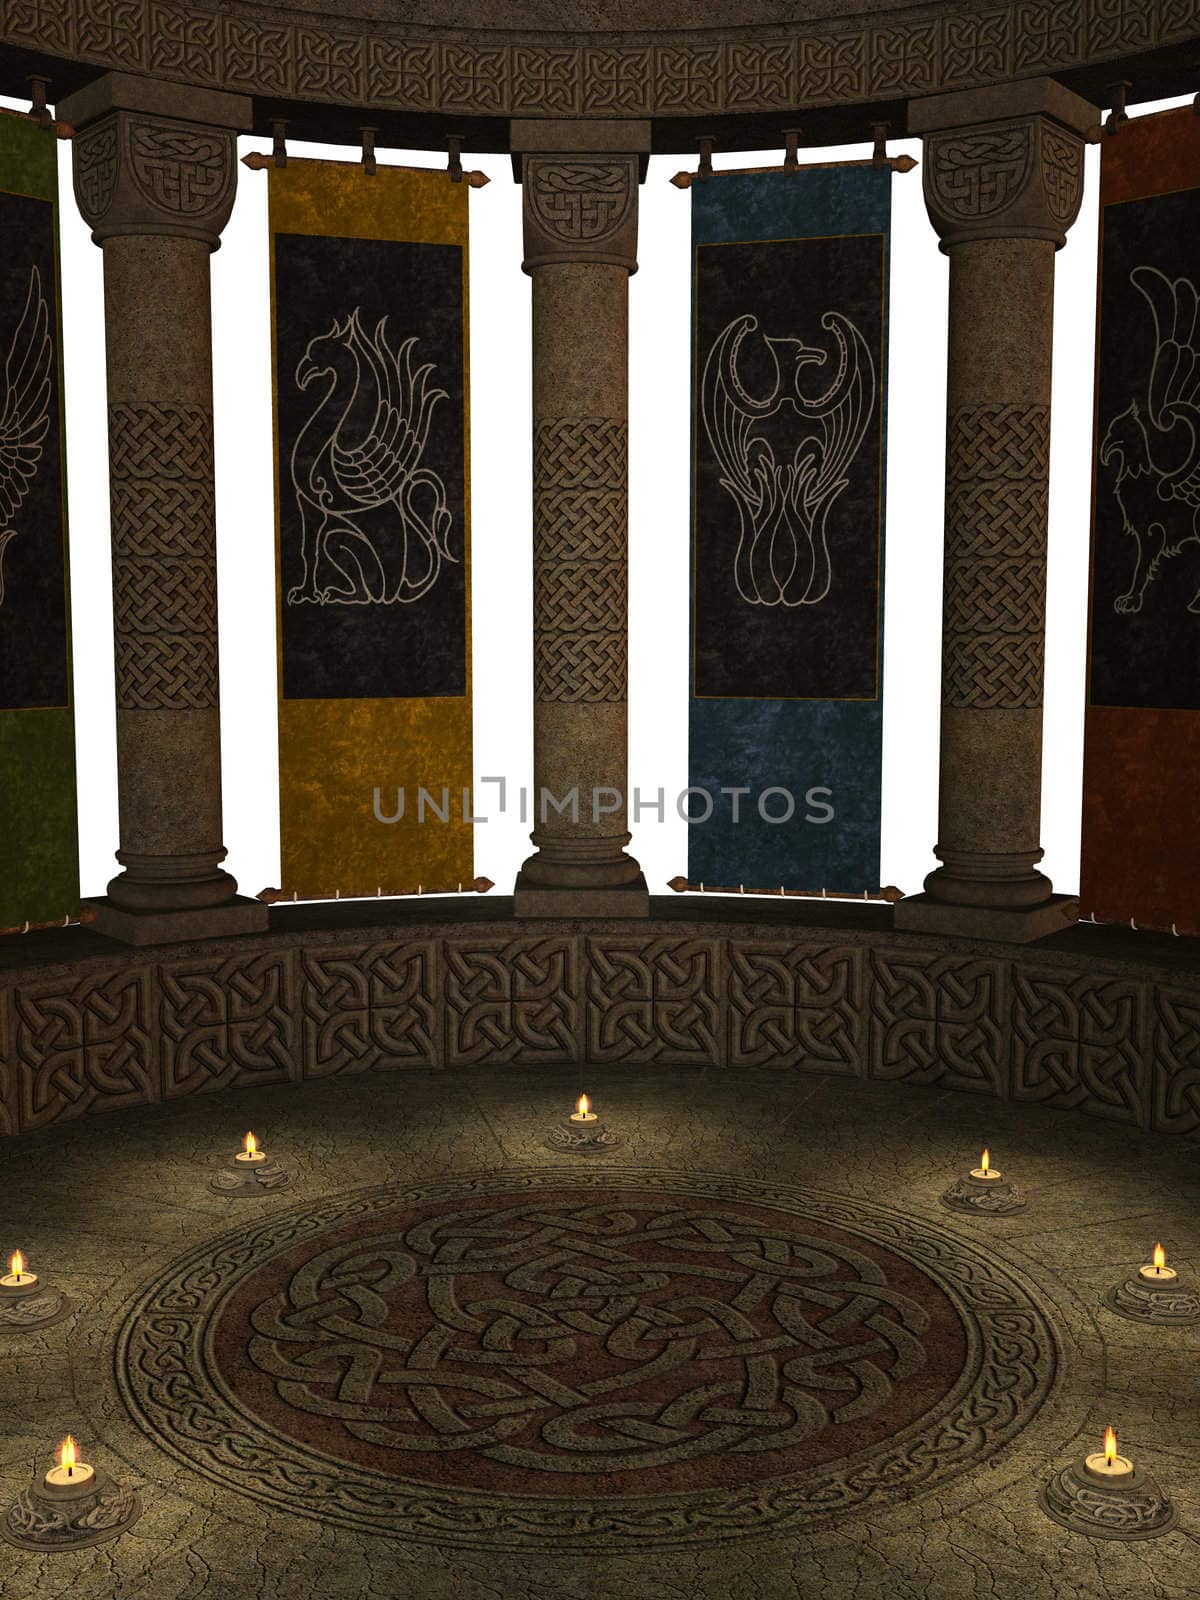 Columns with Banners and Candles by kathygold